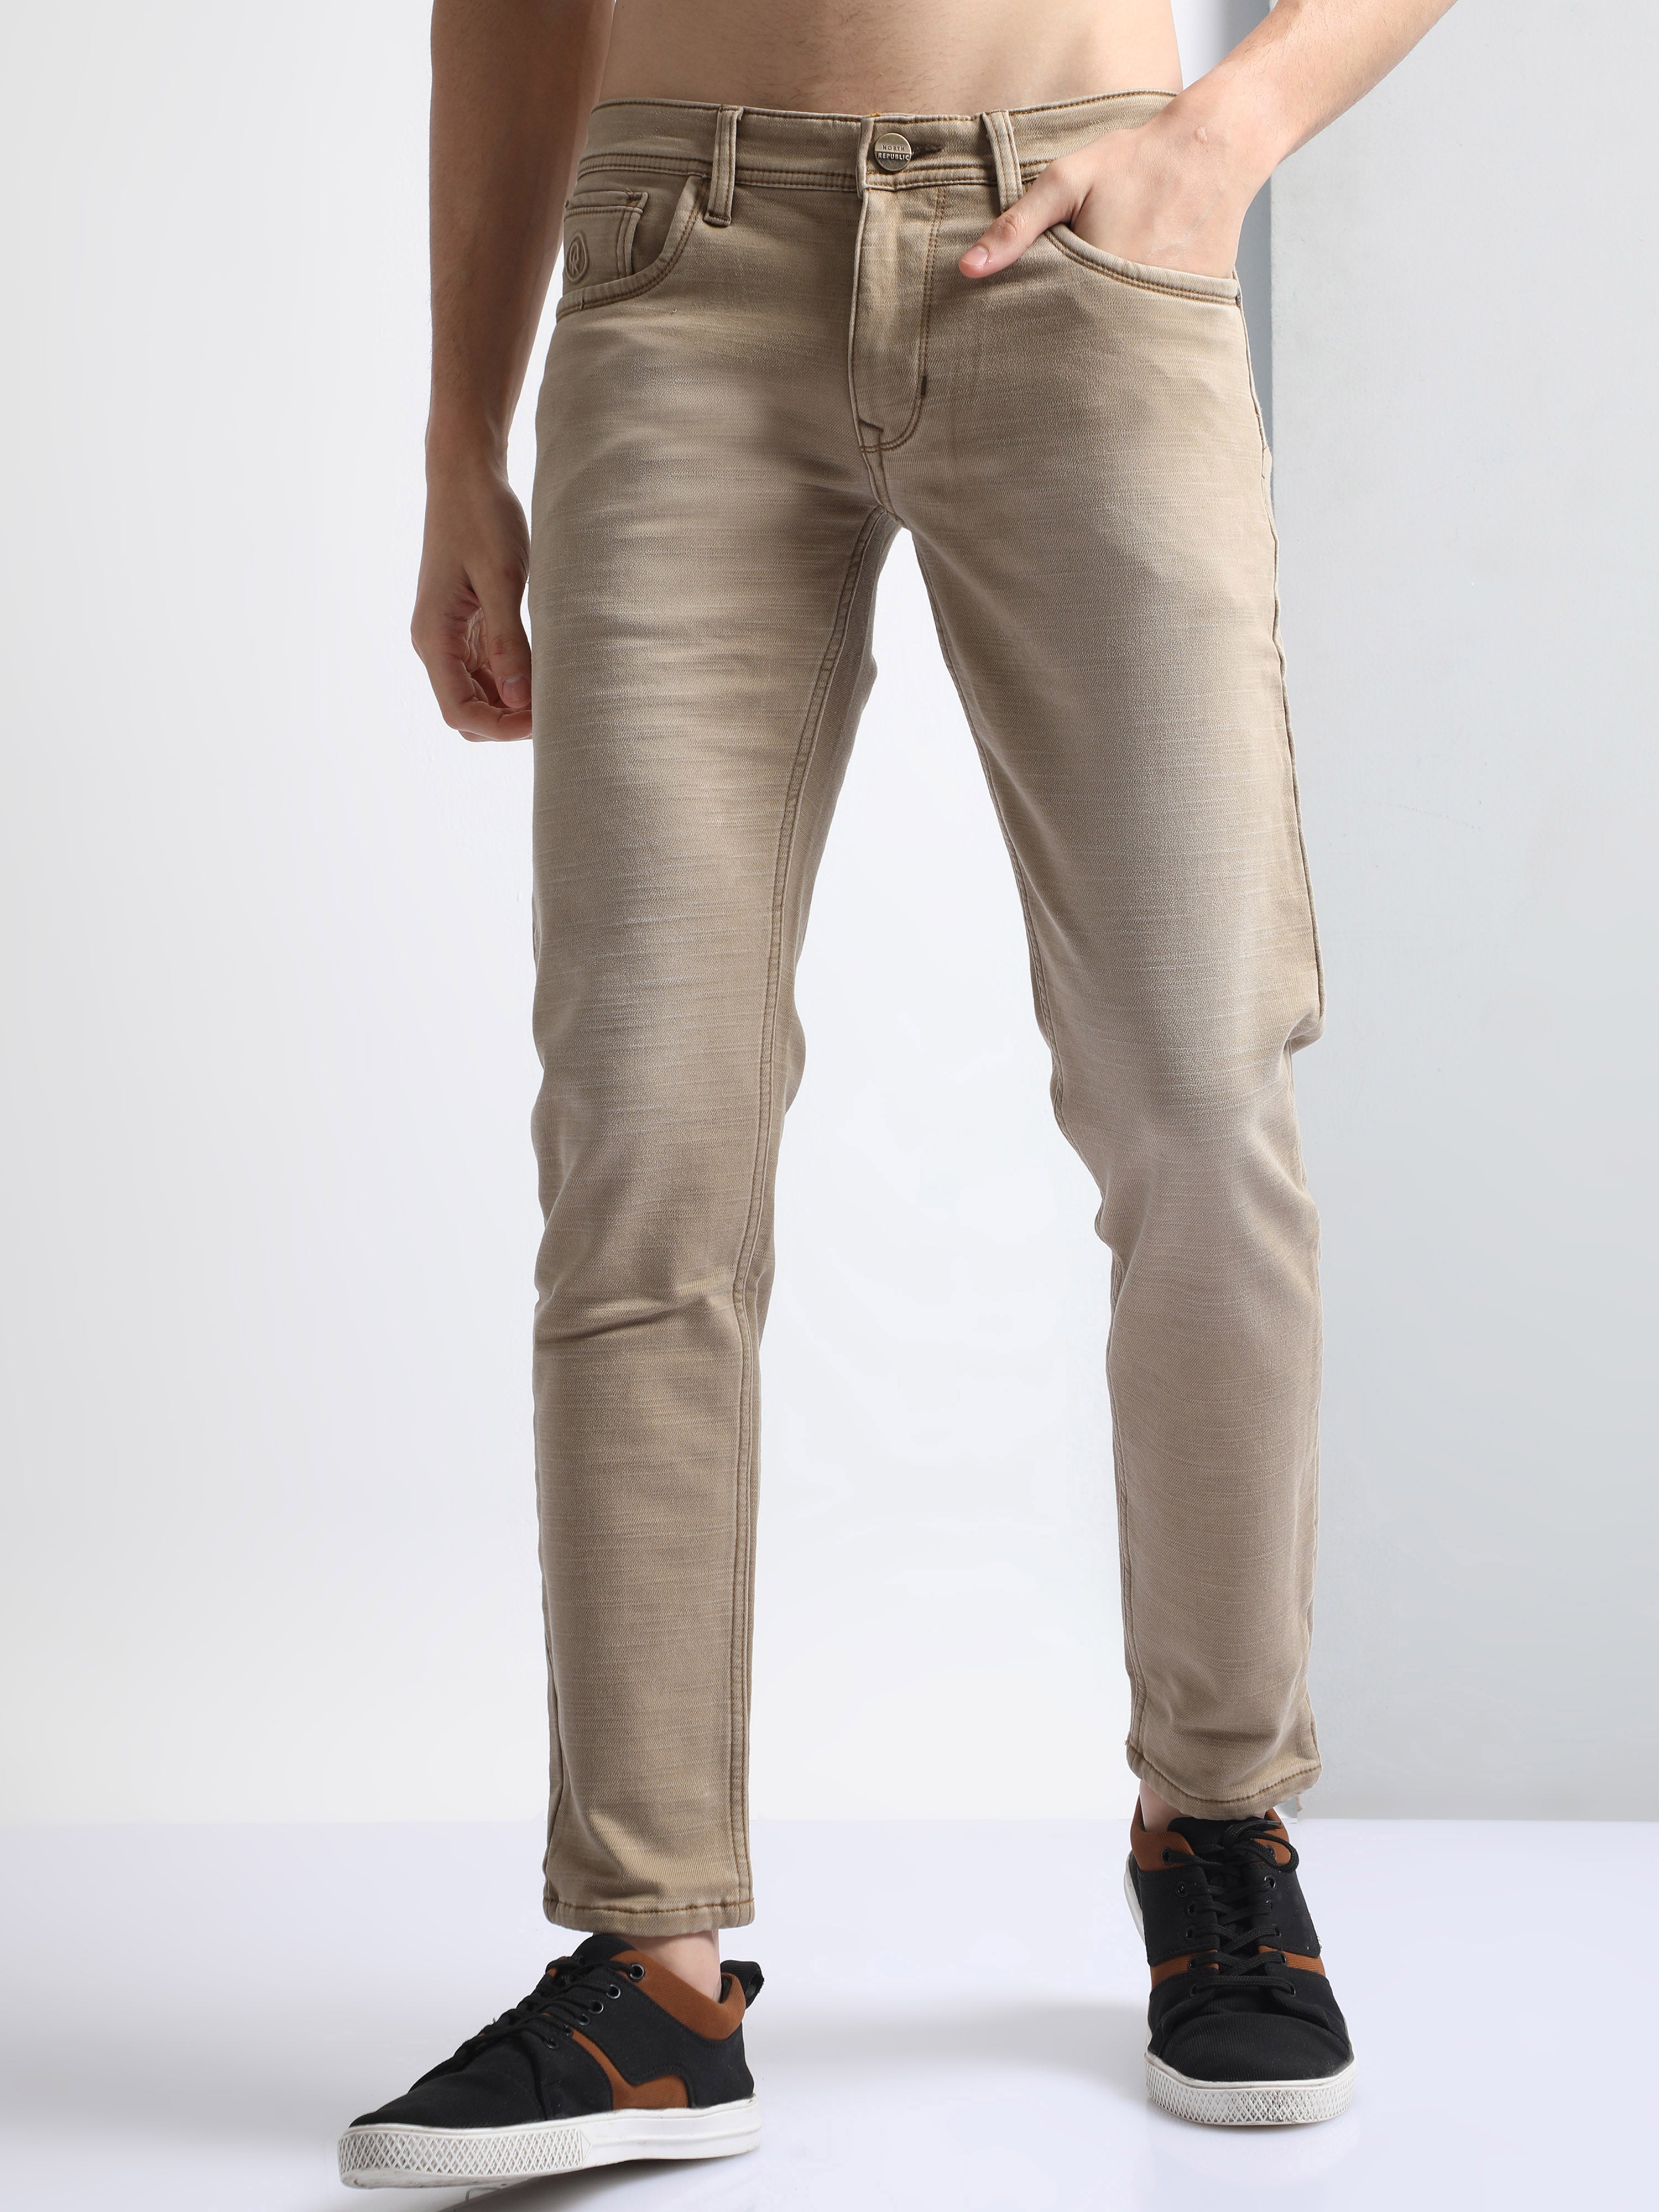 Express Men | Slim Rust Colored Hyper Stretch Jeans in Marrakesh | Express  Style Trial